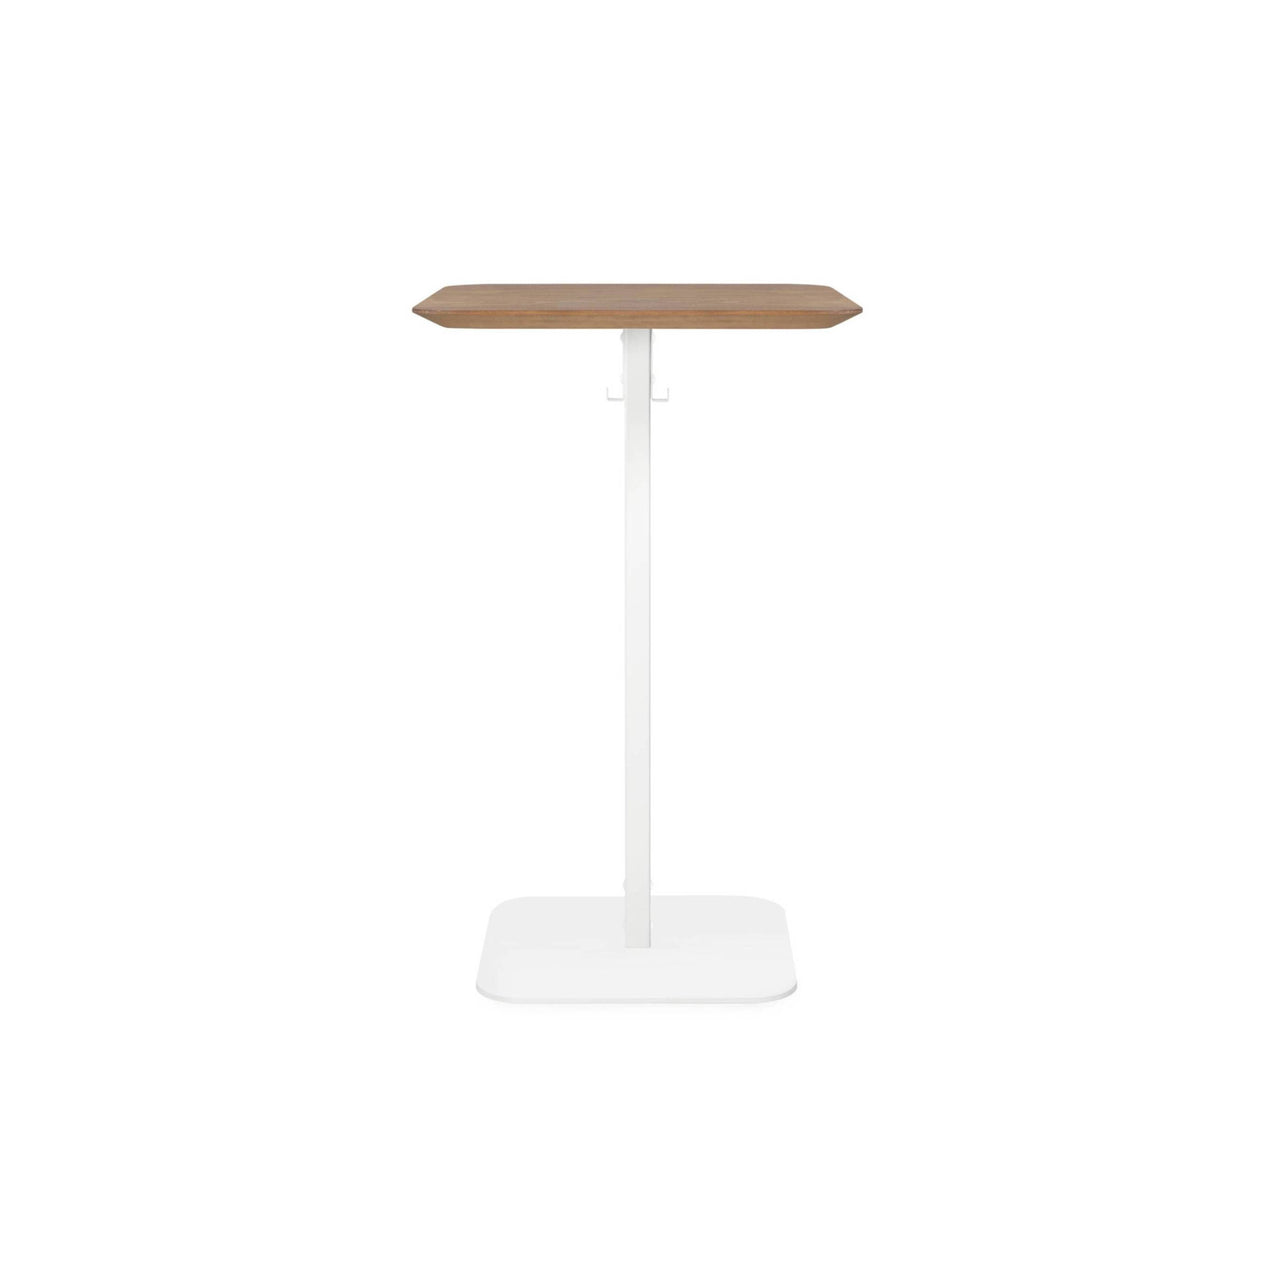 B-Around Square Table: Small + Tall + White